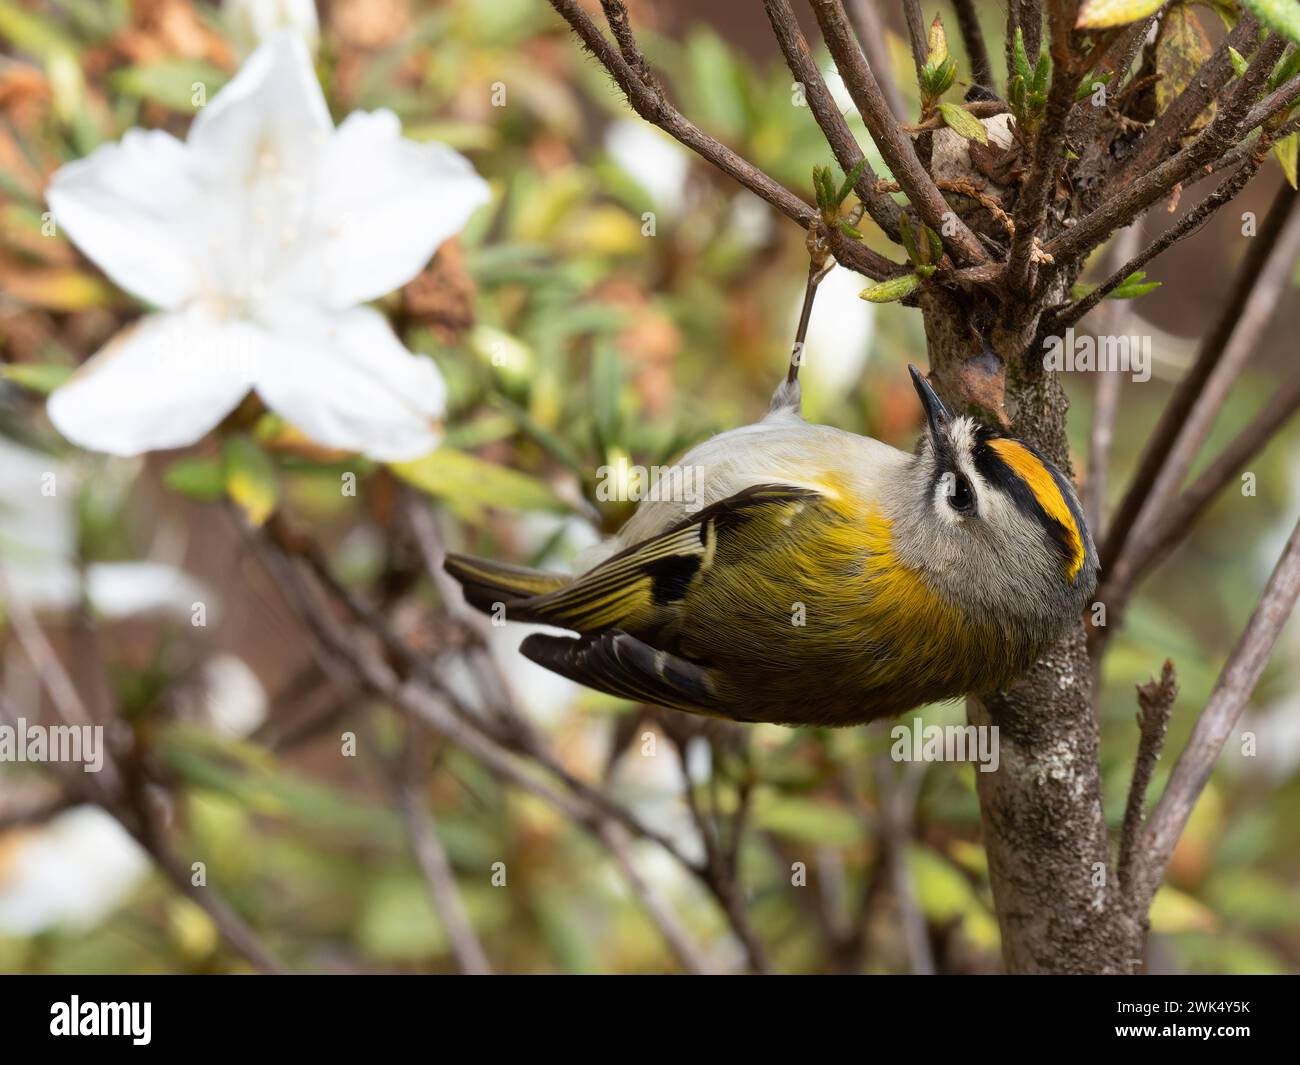 A Madeira firecrest, also known as Madeira kinglet, or Madeira crest, Regulus madeirensis, which is endemic to the island of Madeira. Stock Photo